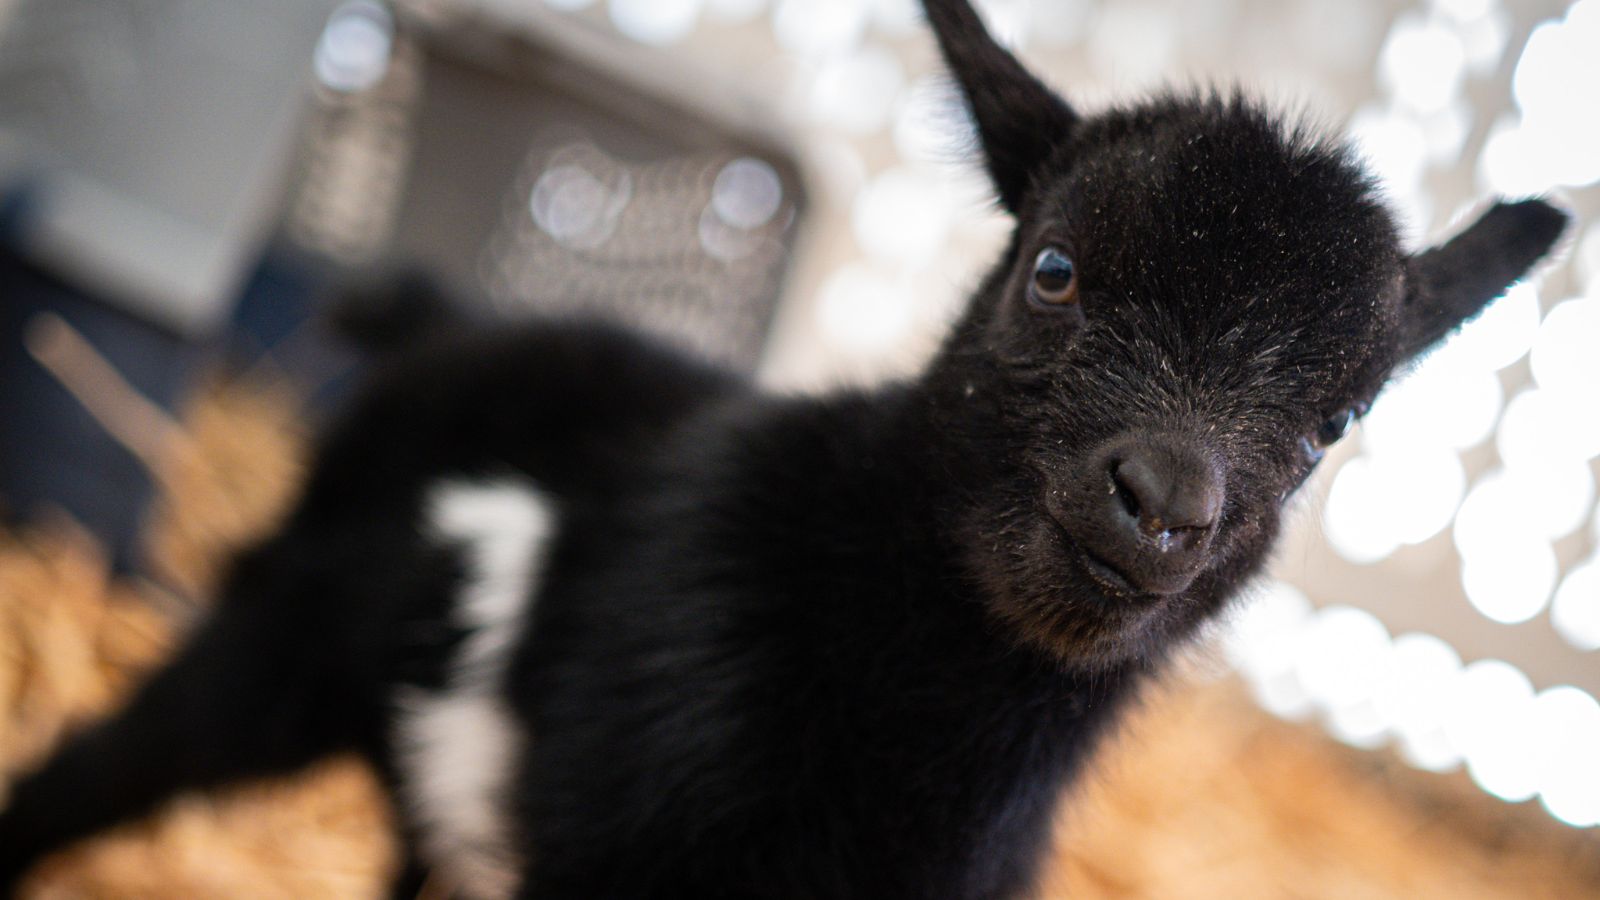 Phoenix Zoo invites public to pick names for baby goats